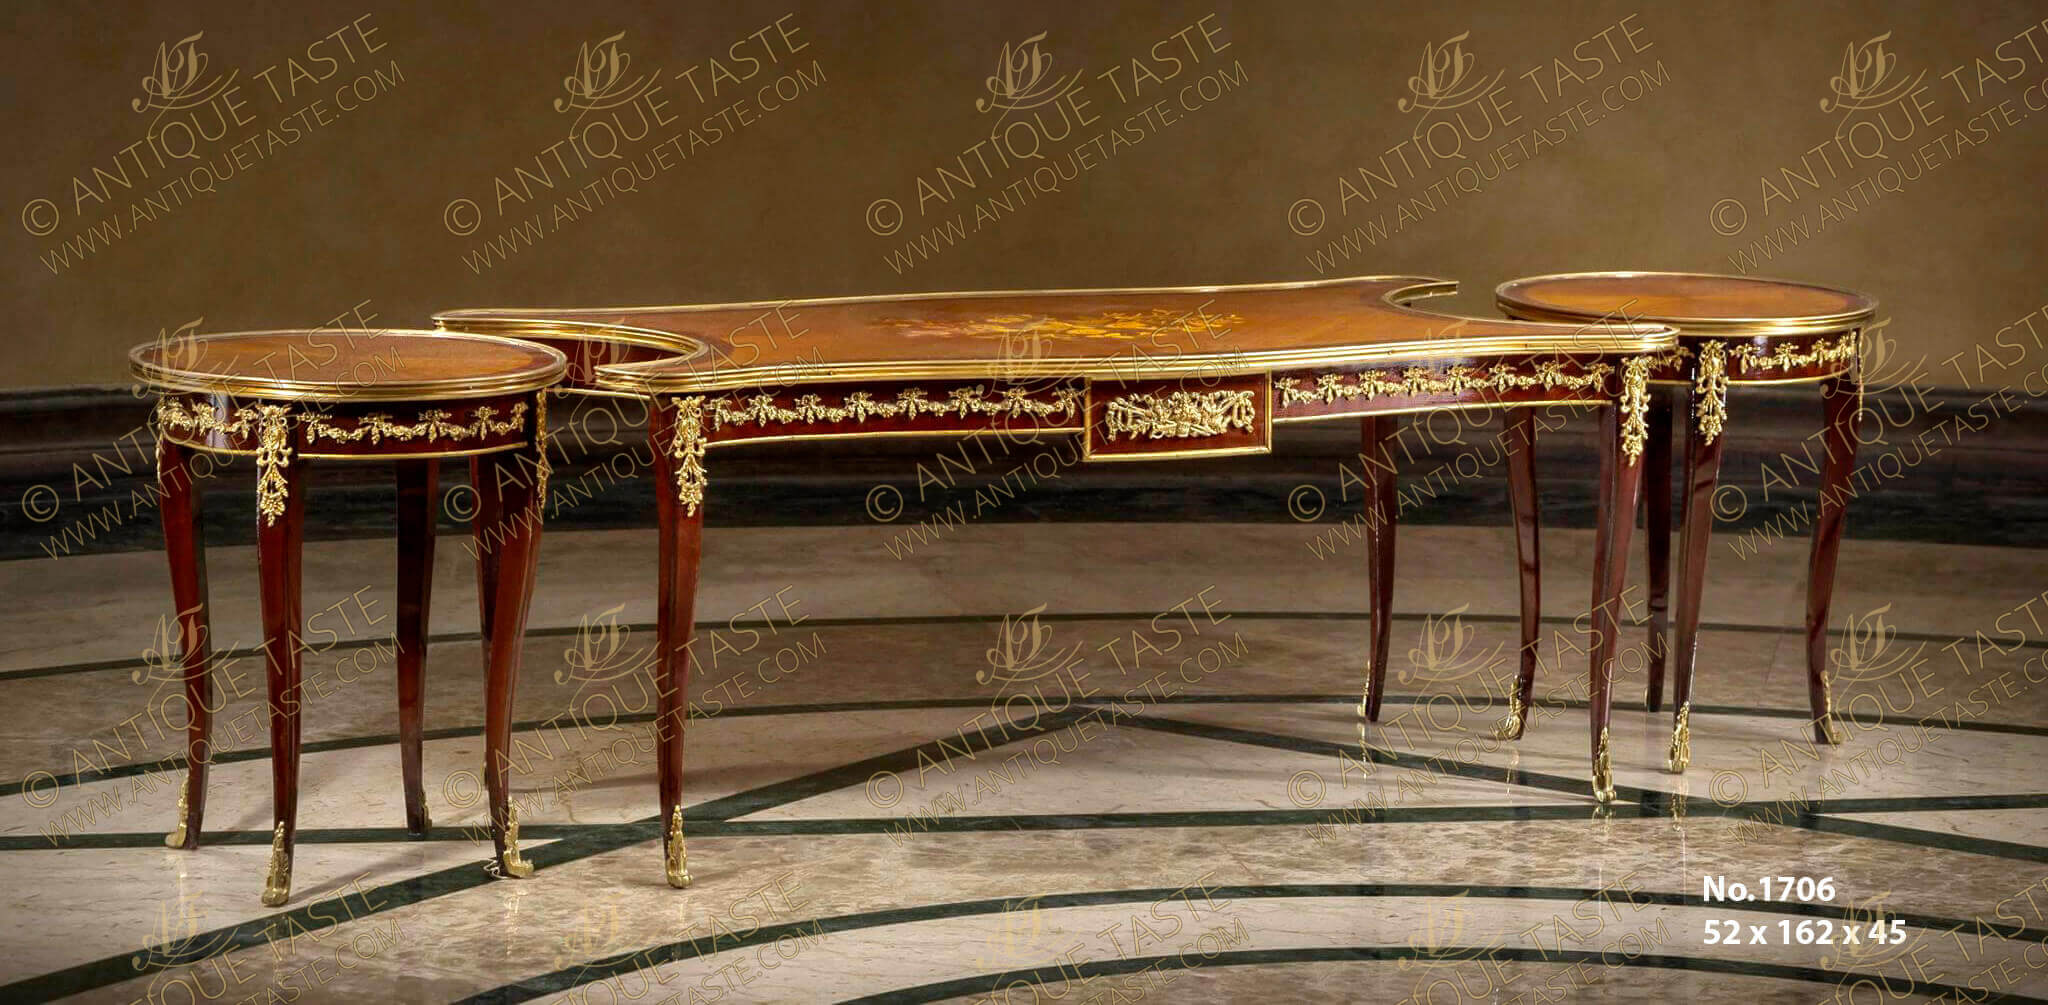 Transitional Louis XV/Louis XVI style ormolu-mounted marquetry and veneer inlaid 3 pieces Center Coffee Table after the model by Francois Linke